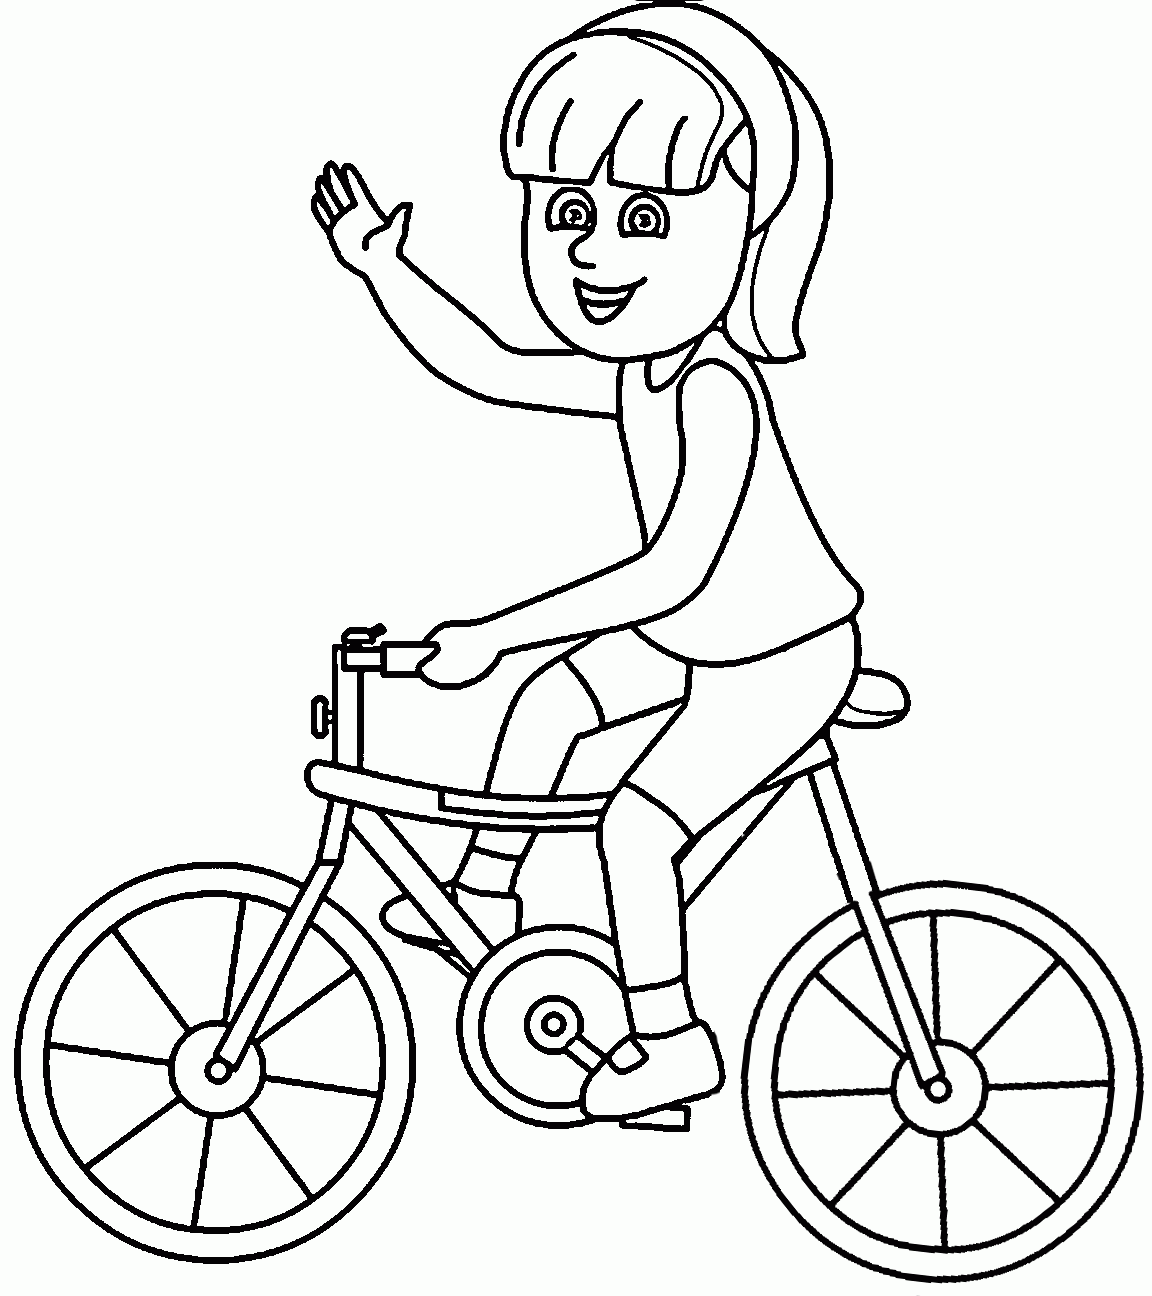 Riding Girl_on_bicycle Coloring Page | Wecoloringpage